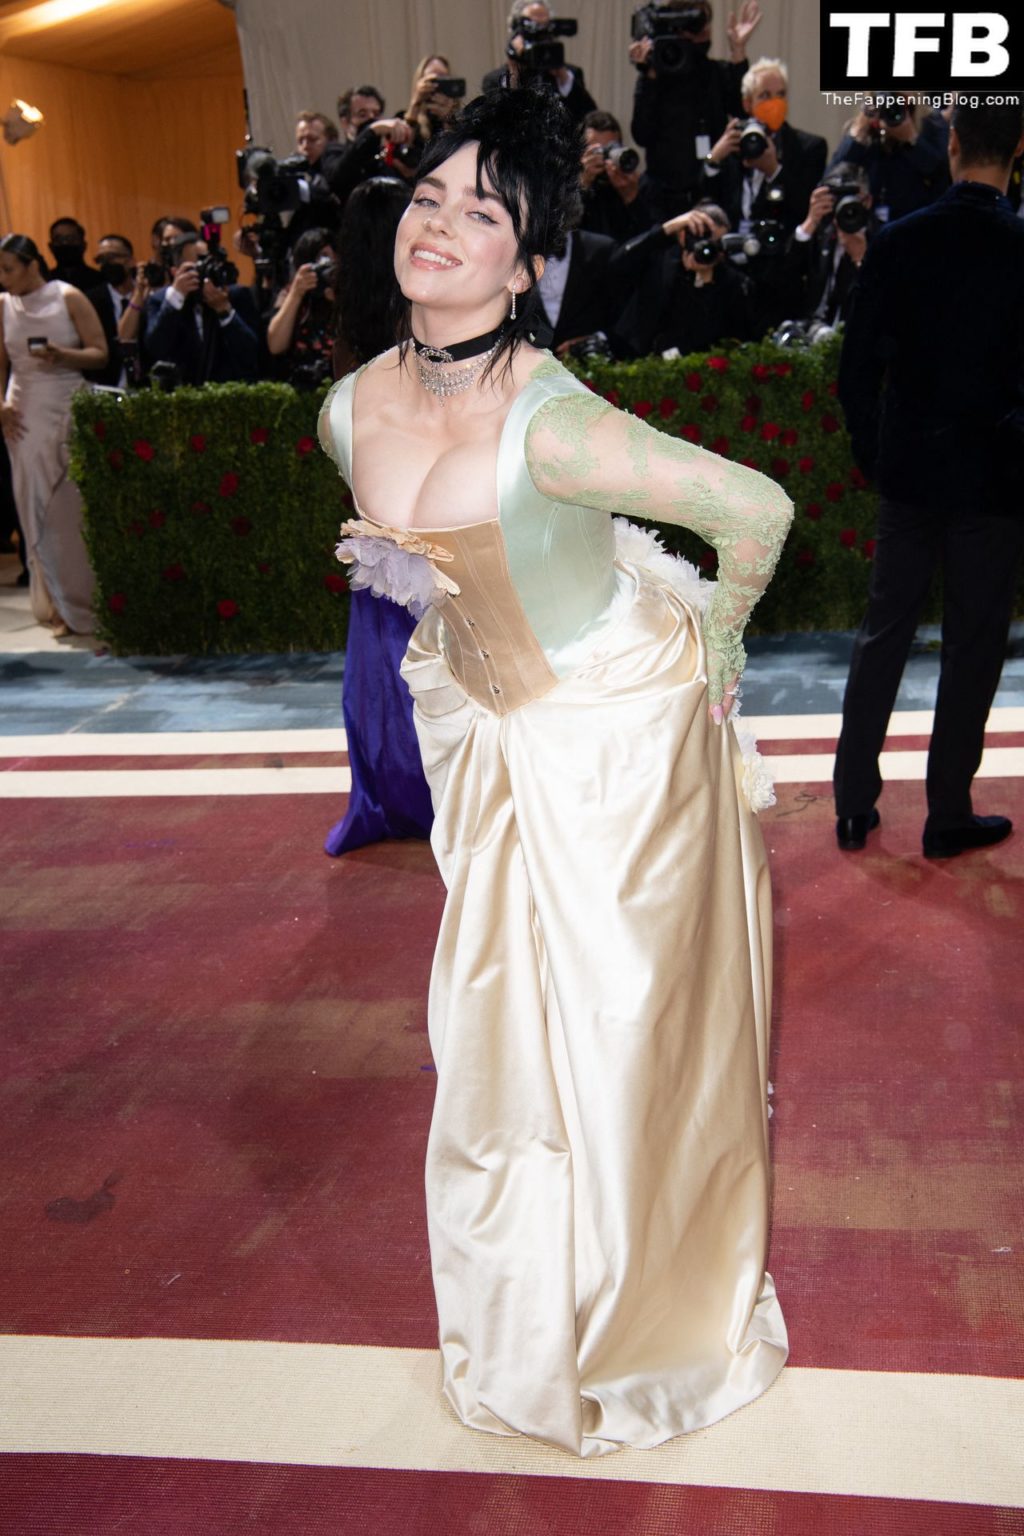 Billie Eilish Sexy The Fappening Blog 25 1024x1536 - Billie Eilish Showcases Nice Cleavage at The 2022 Met Gala in NYC (155 Photos)